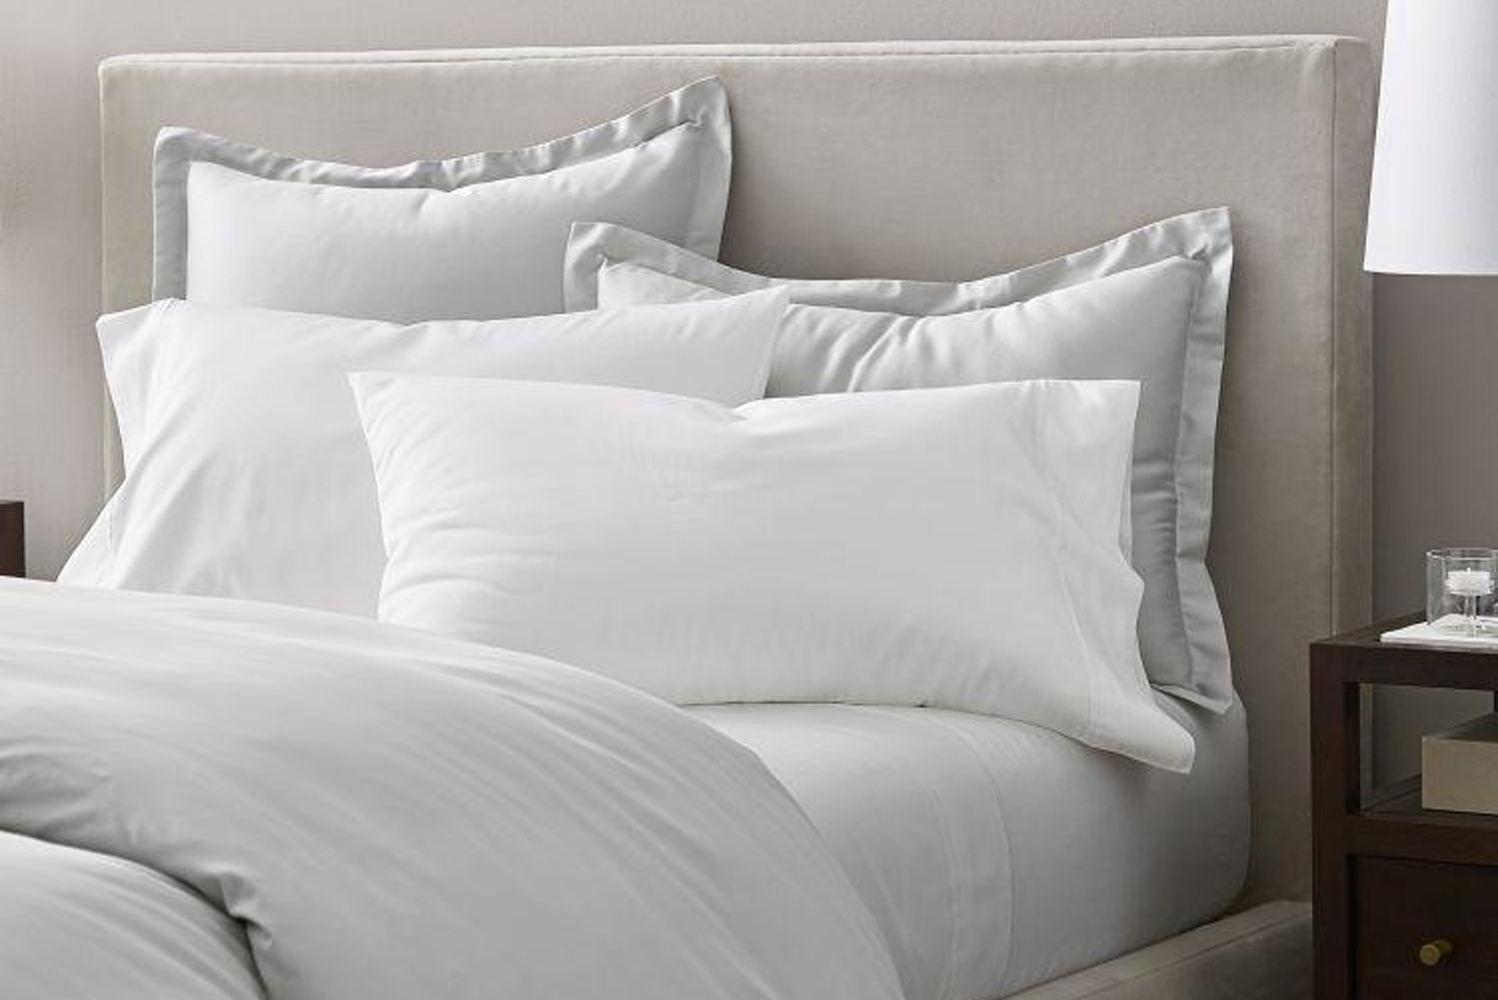 Giselle Bedding Afterpay